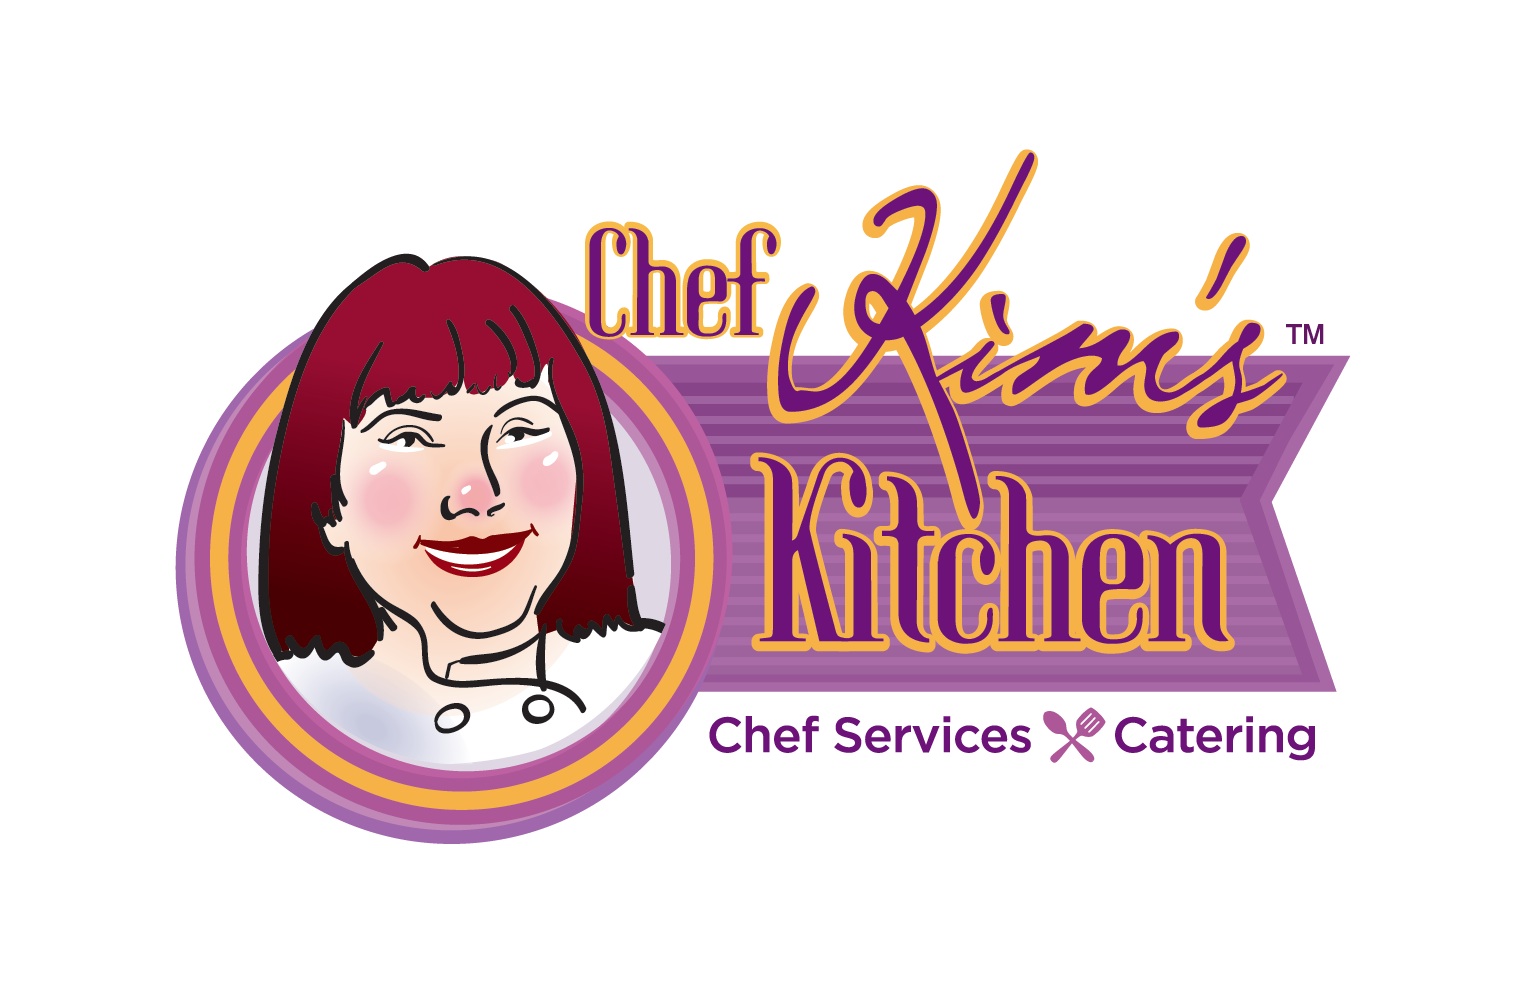 Chef Kim's Kitchen has observed an increase in catering requests for shore rentals over the past three years.